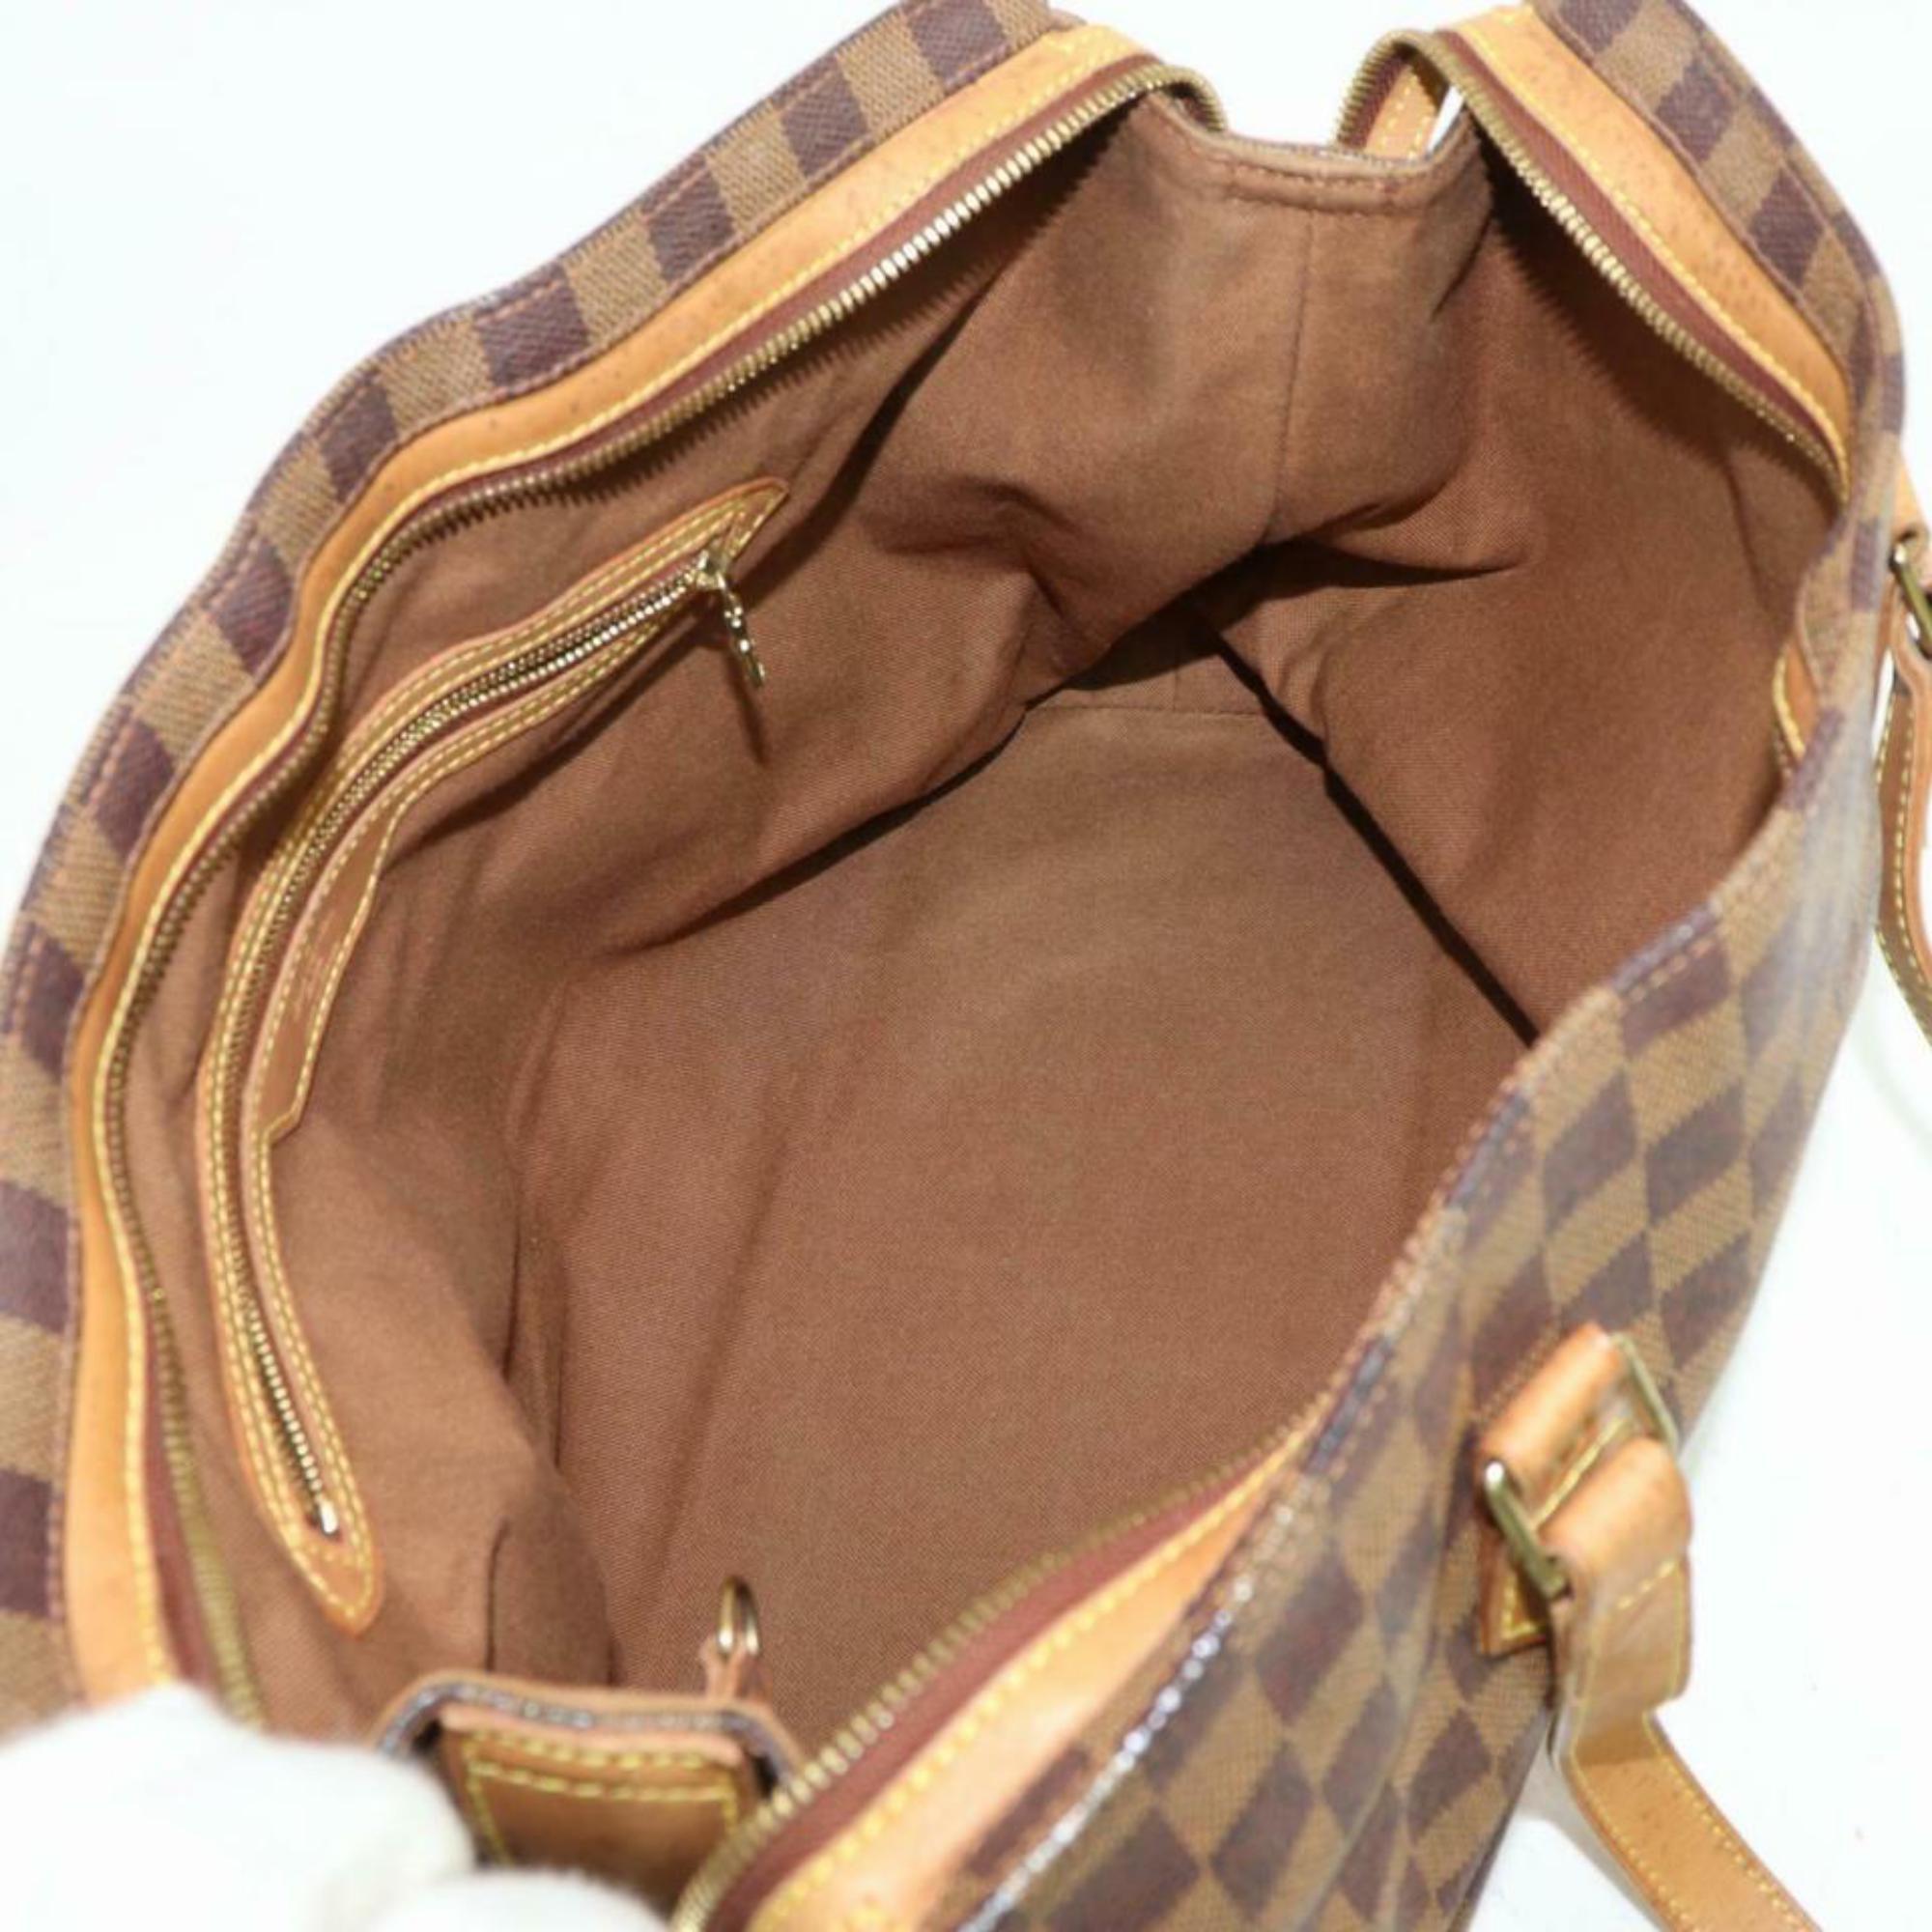 Louis Vuitton  Centenaire Columbine Zip Tote 870579 Brown Shoulder Bag In Good Condition For Sale In Forest Hills, NY